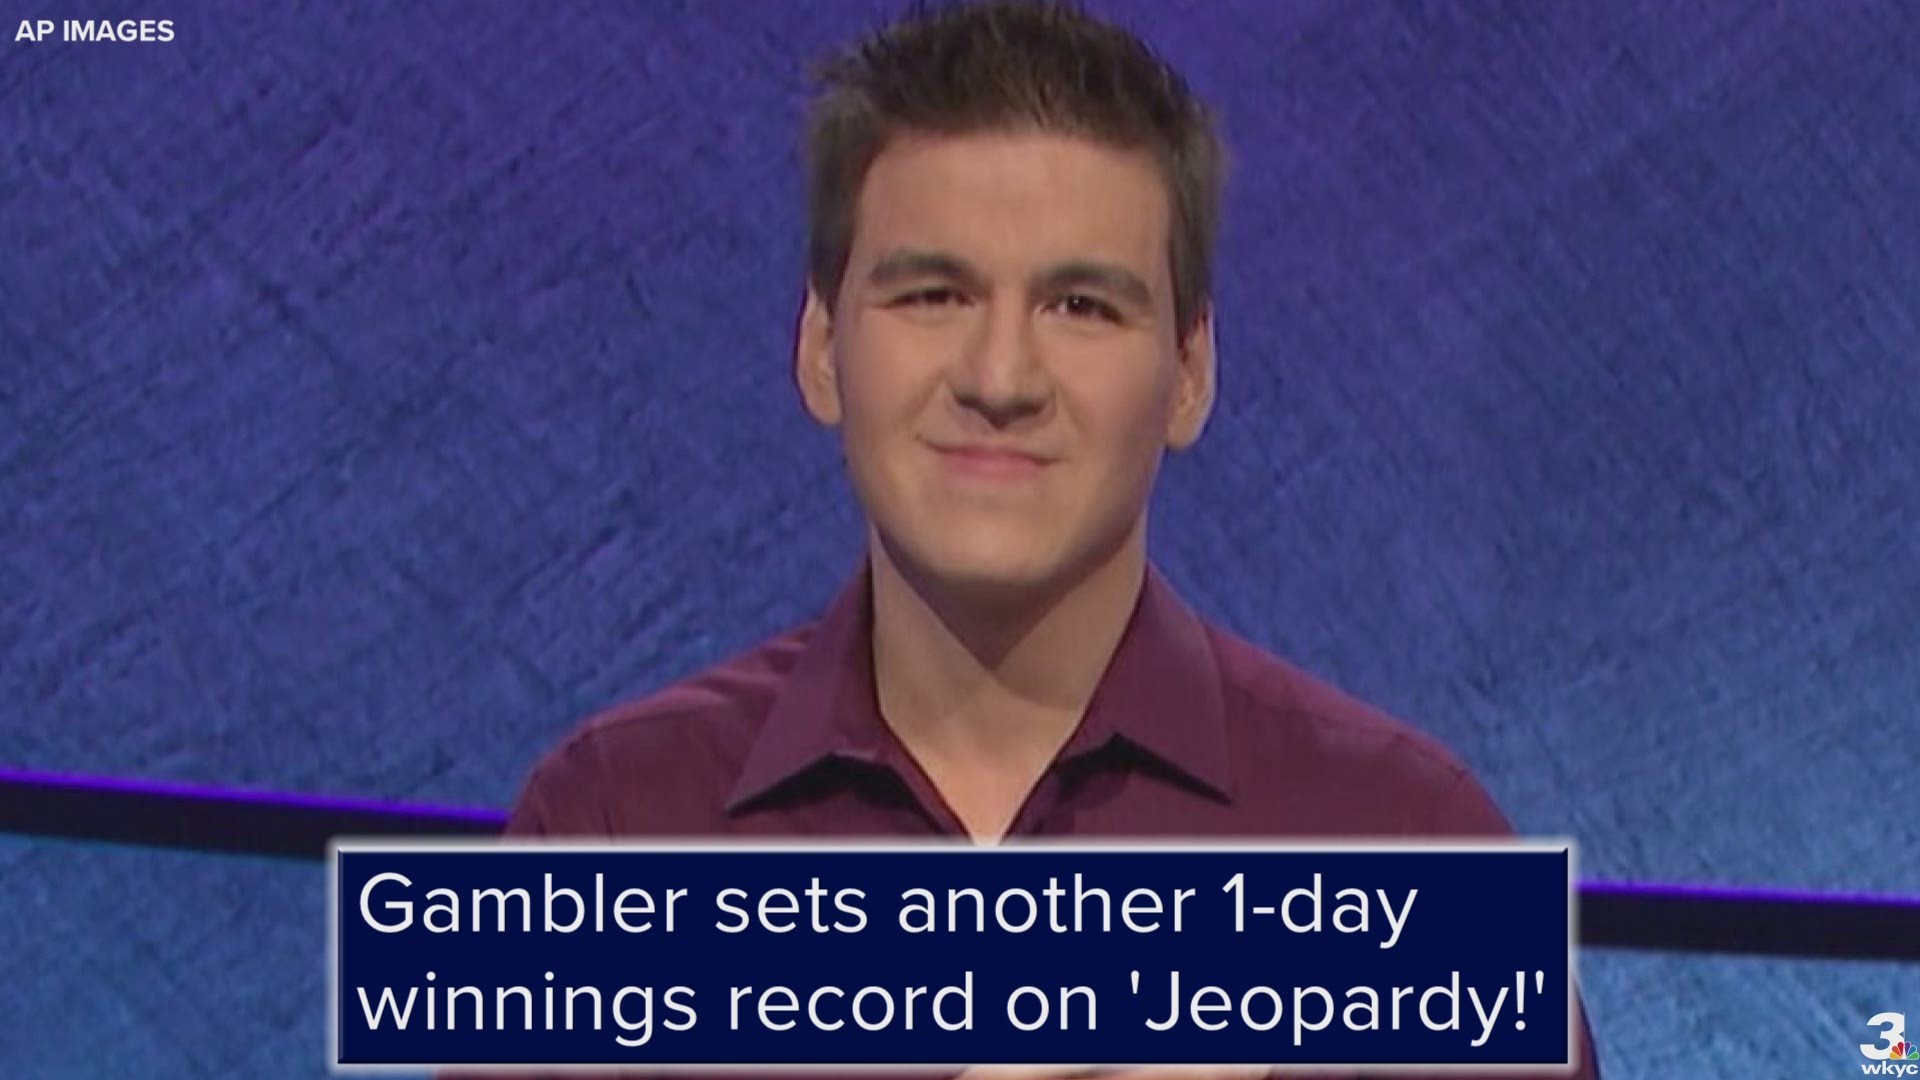 James Holzhauer won $131,127 during a show aired Wednesday night, breaking the record that viewers saw him set last week.